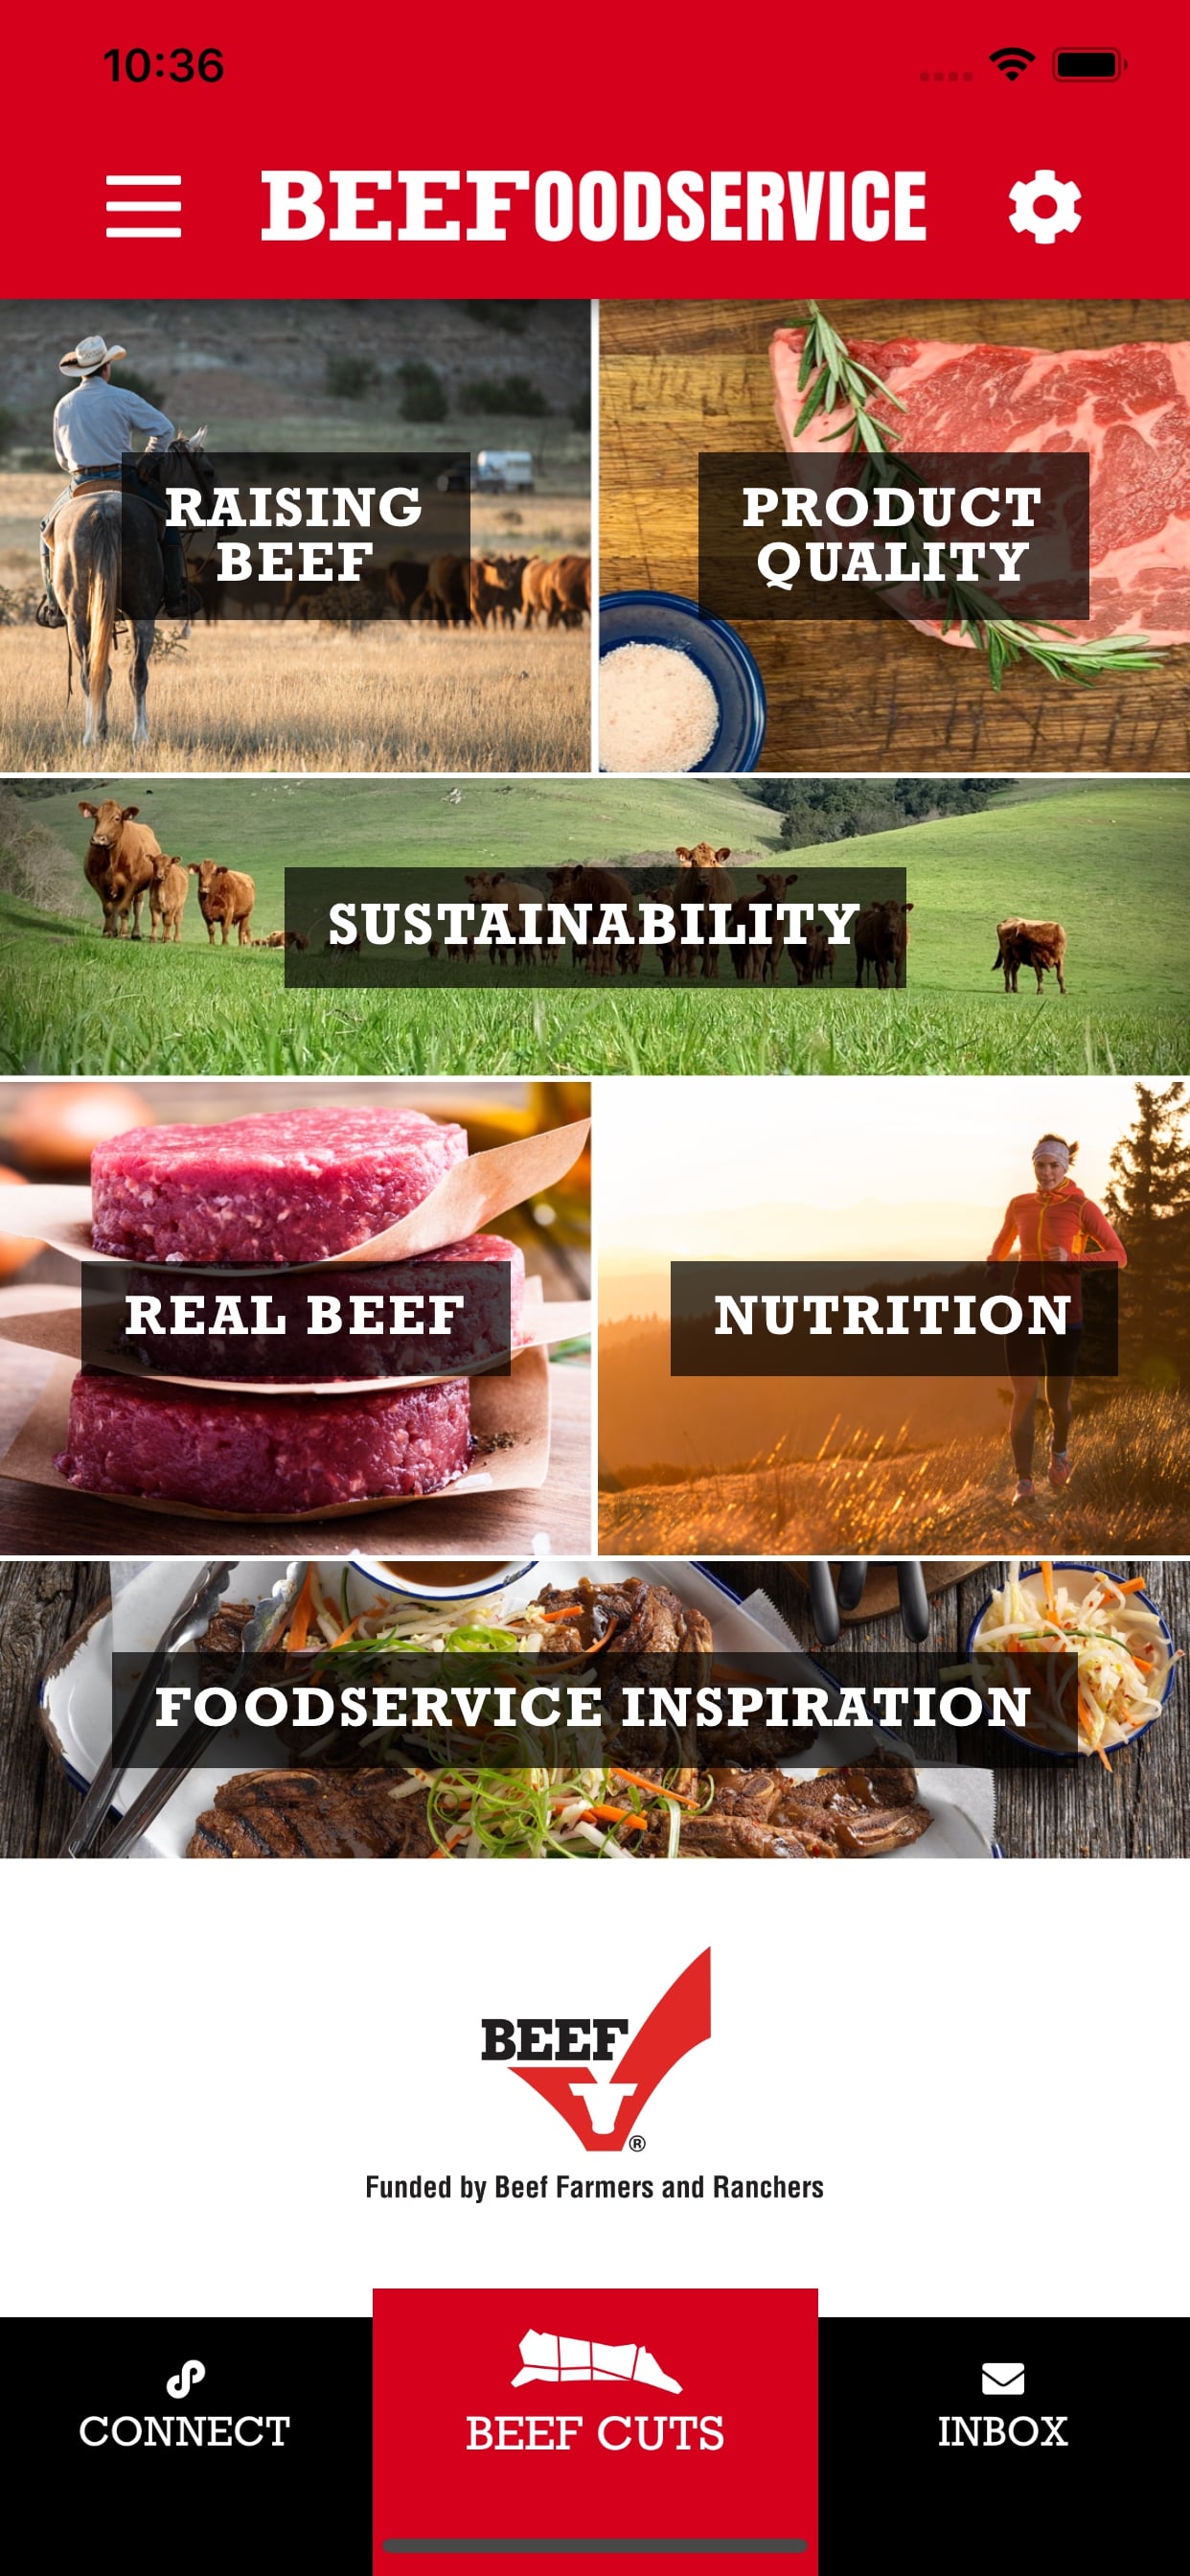 More than beef cuts, training, menuing versatility and other foodservice resources, the BEEFoodservice app also provides information on how beef is raised, sustainability and beef's nutrition profile.